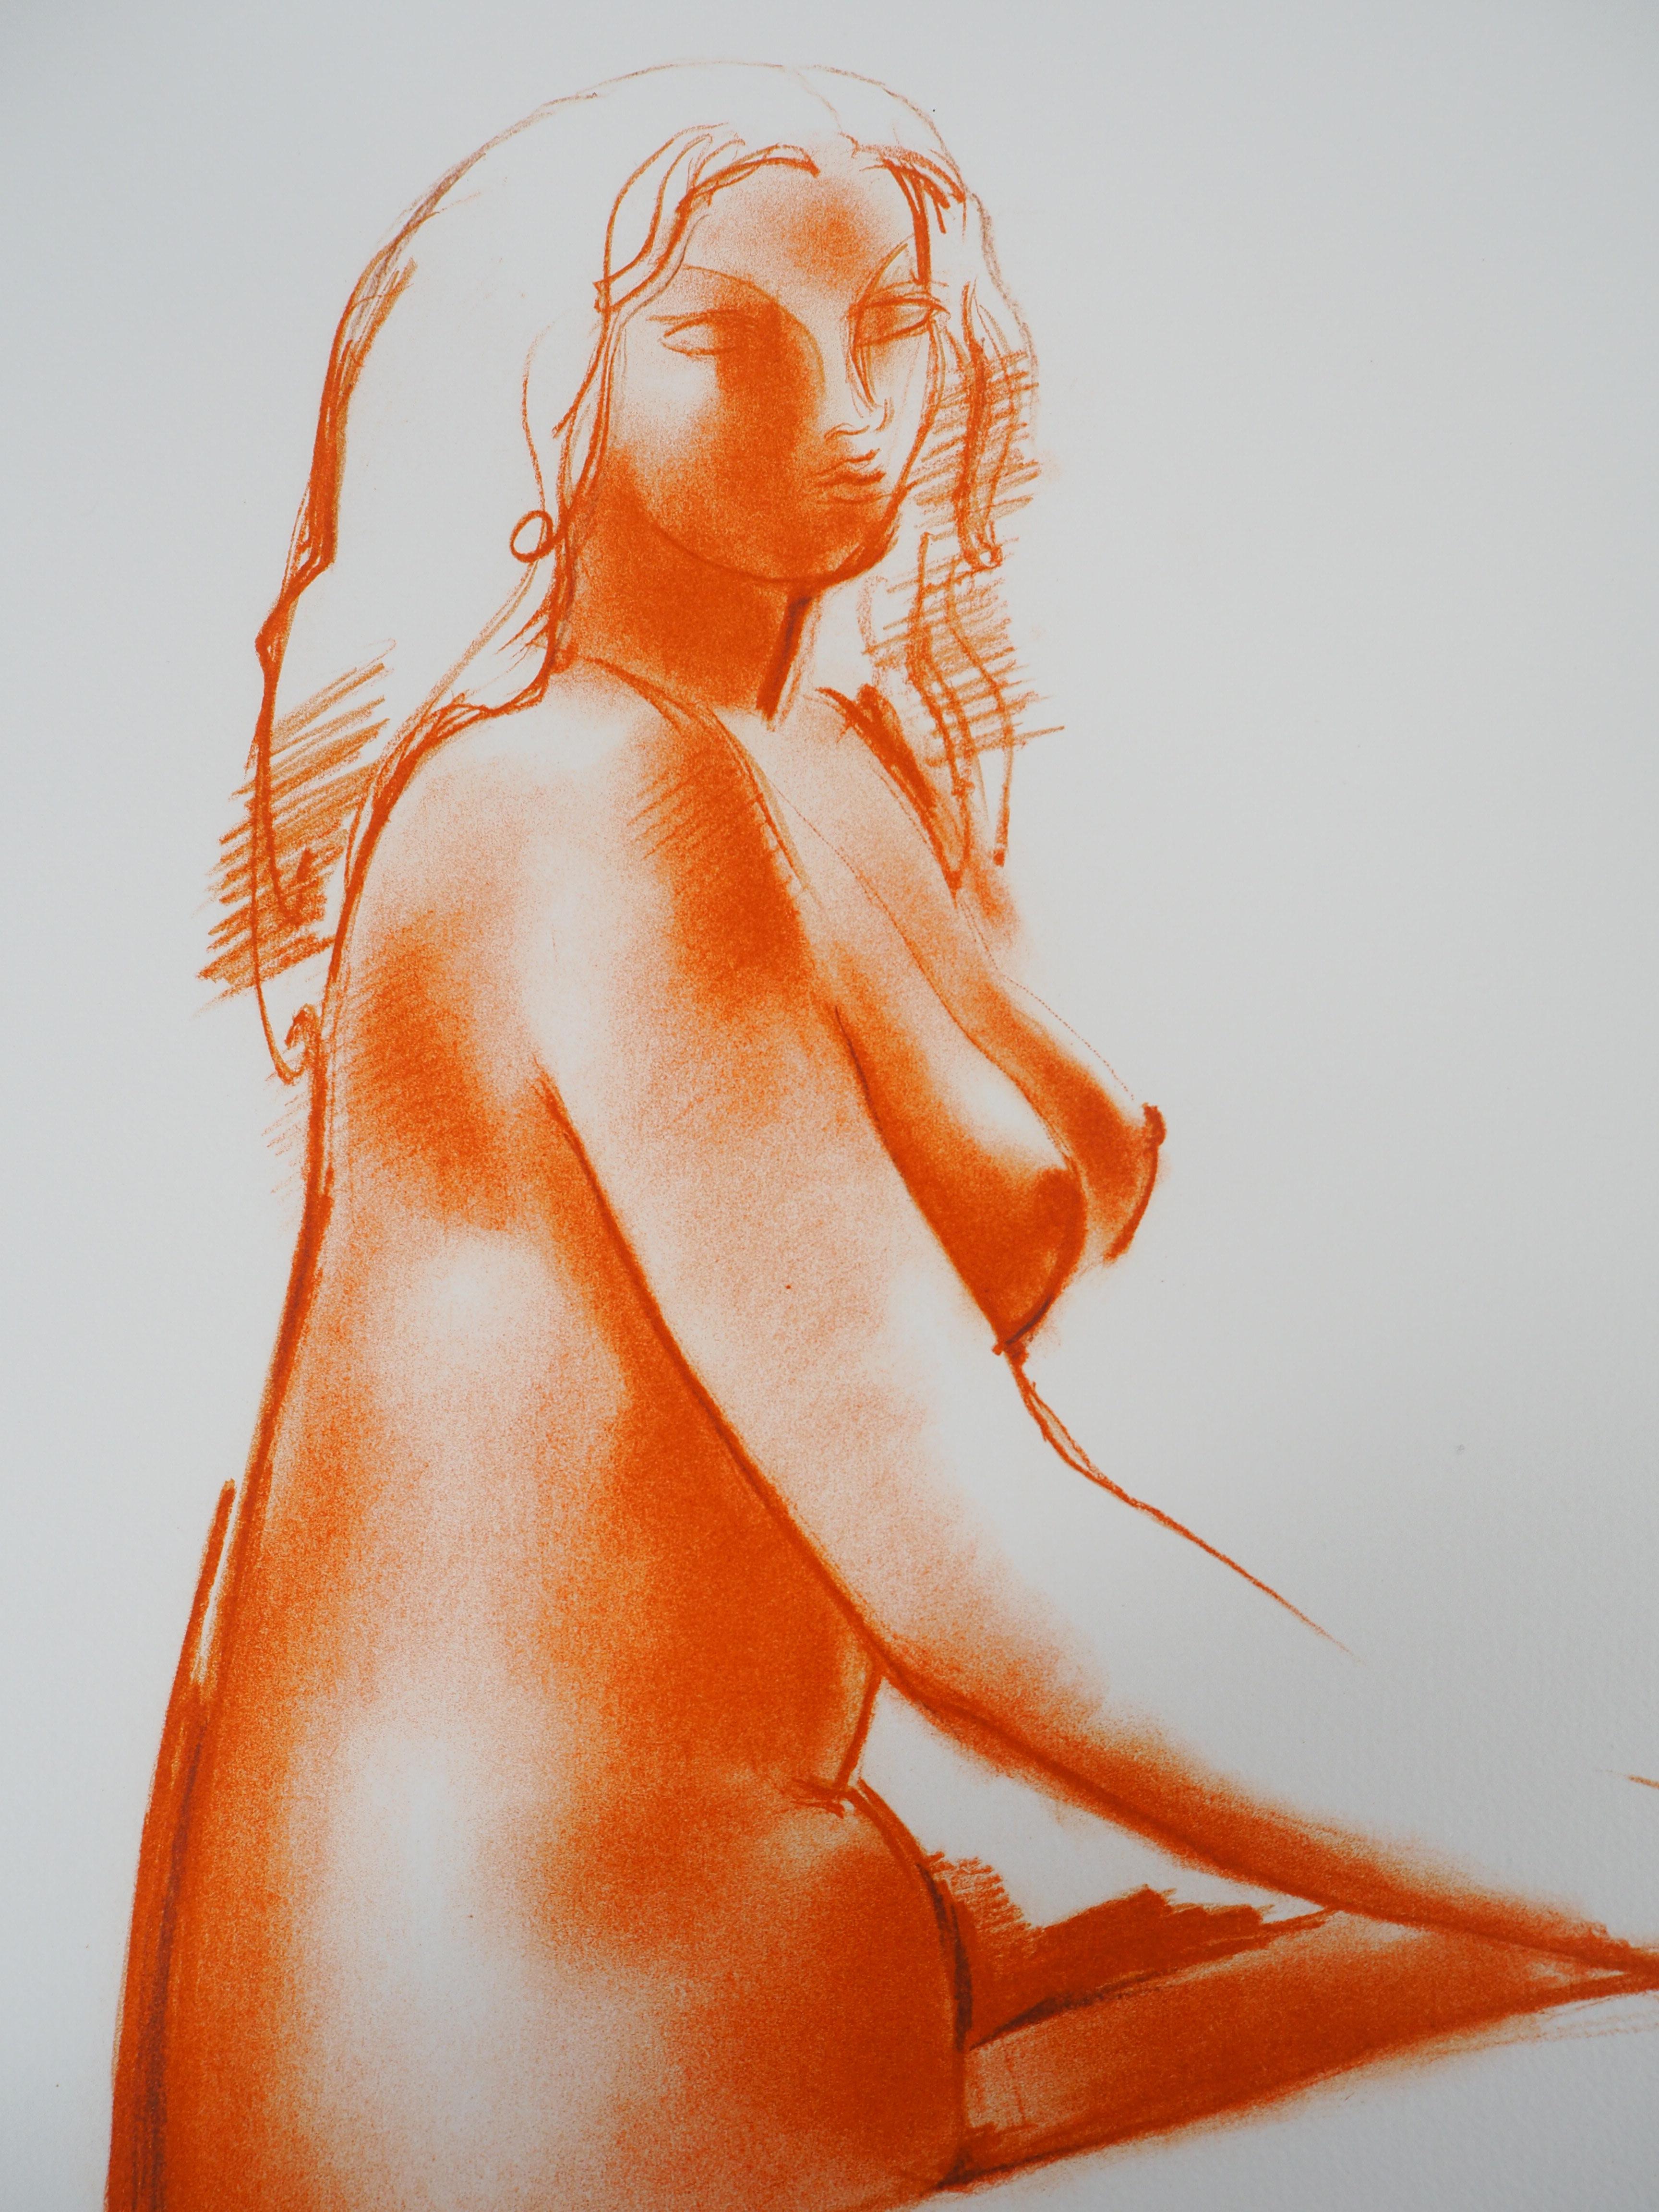 Antoniucci Volti (1915-1989)
Seated Model 

Original lithograph
Handsigned in pencil
Numbered / 80 copies 
On Arches vellum 65 x 50 cm (c. 26 x 20 in)

Excellent condition